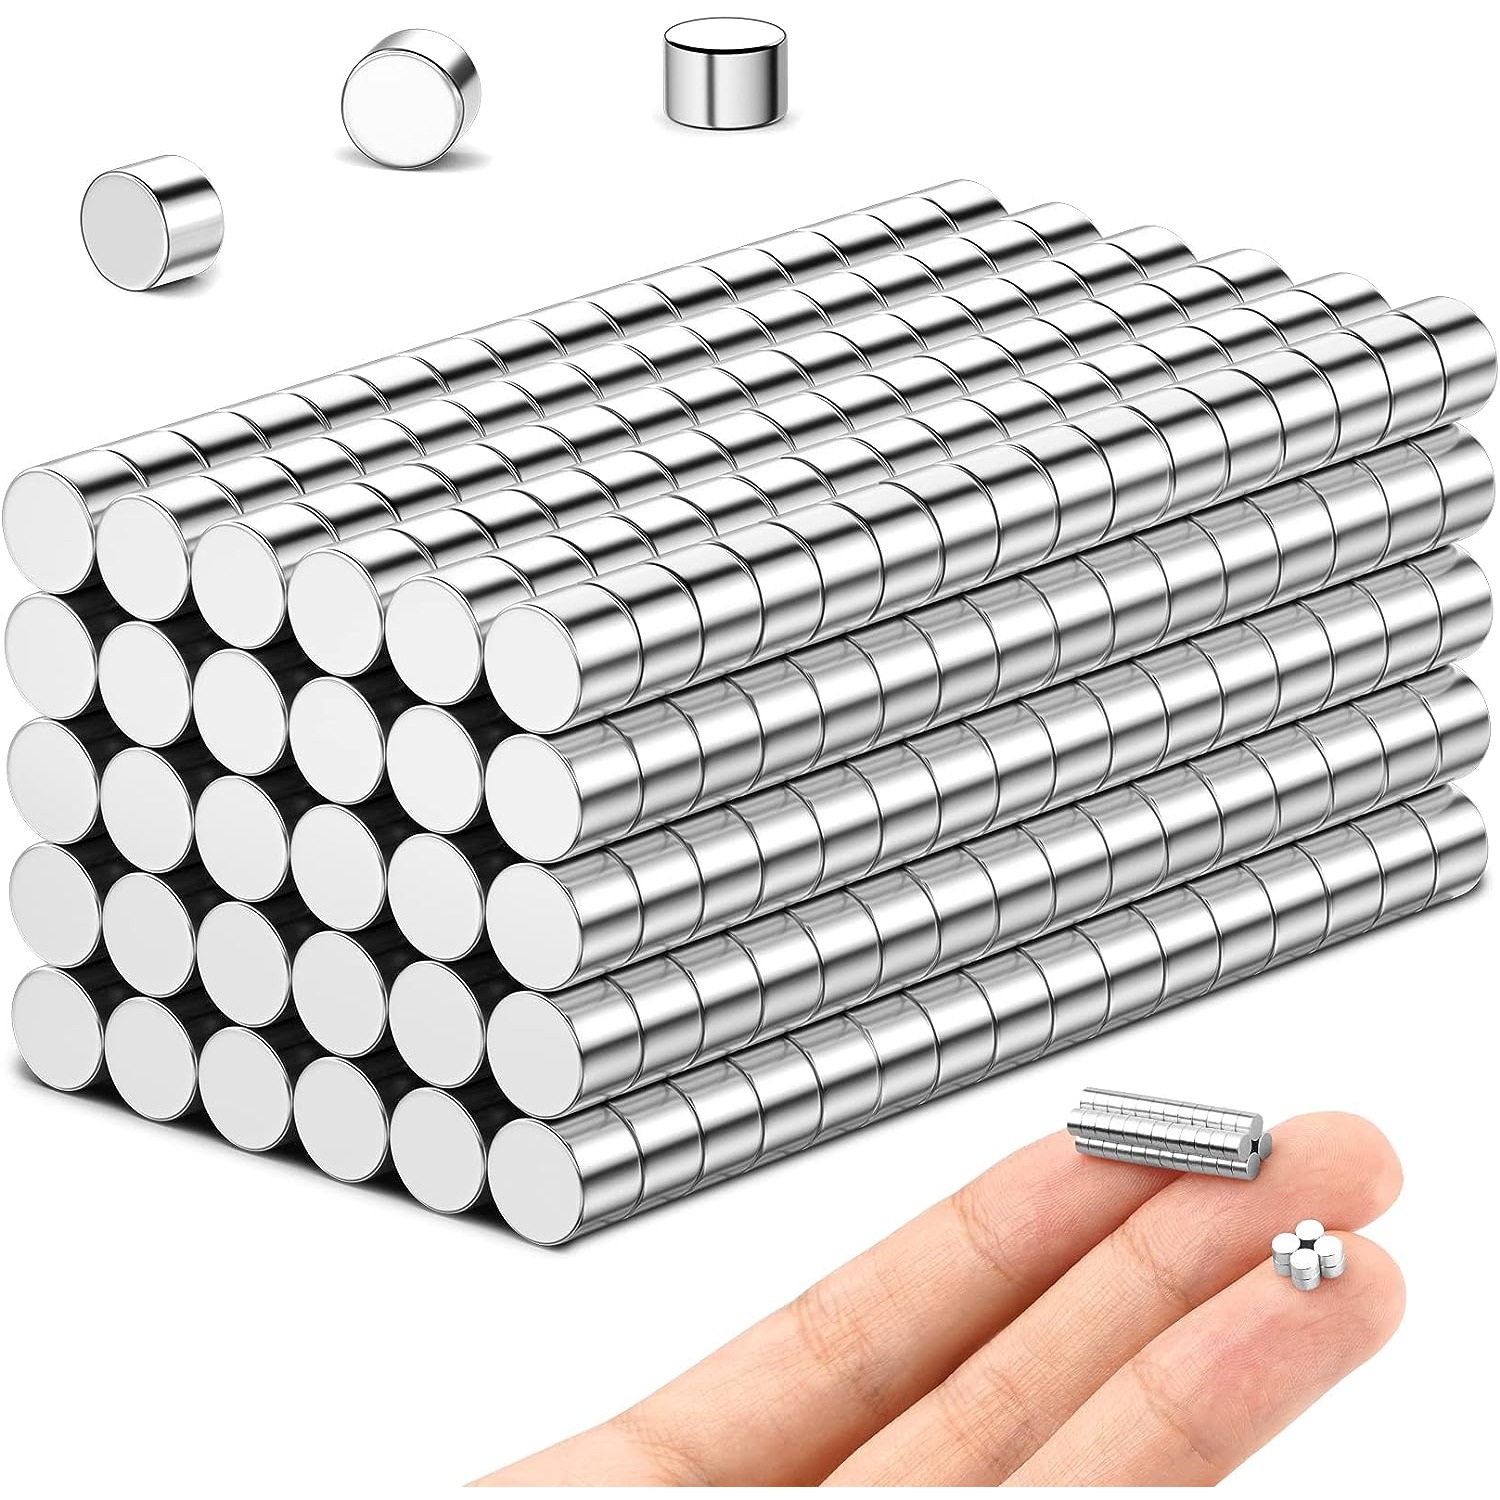 100pcs Small Magnets, 5x2 mm Mini Tiny Round Magnets, Micro Neodymium Magnets for Crafts, Miniatures, Refrigerator, Whiteboard, Nail Cutter